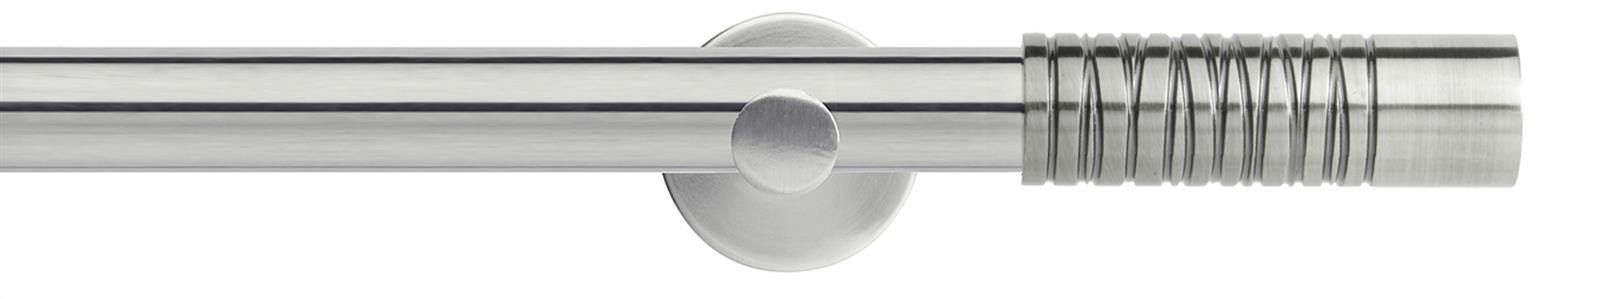 Neo Premium 28mm Eyelet Pole Stainless Steel Cylinder Wired Barrel